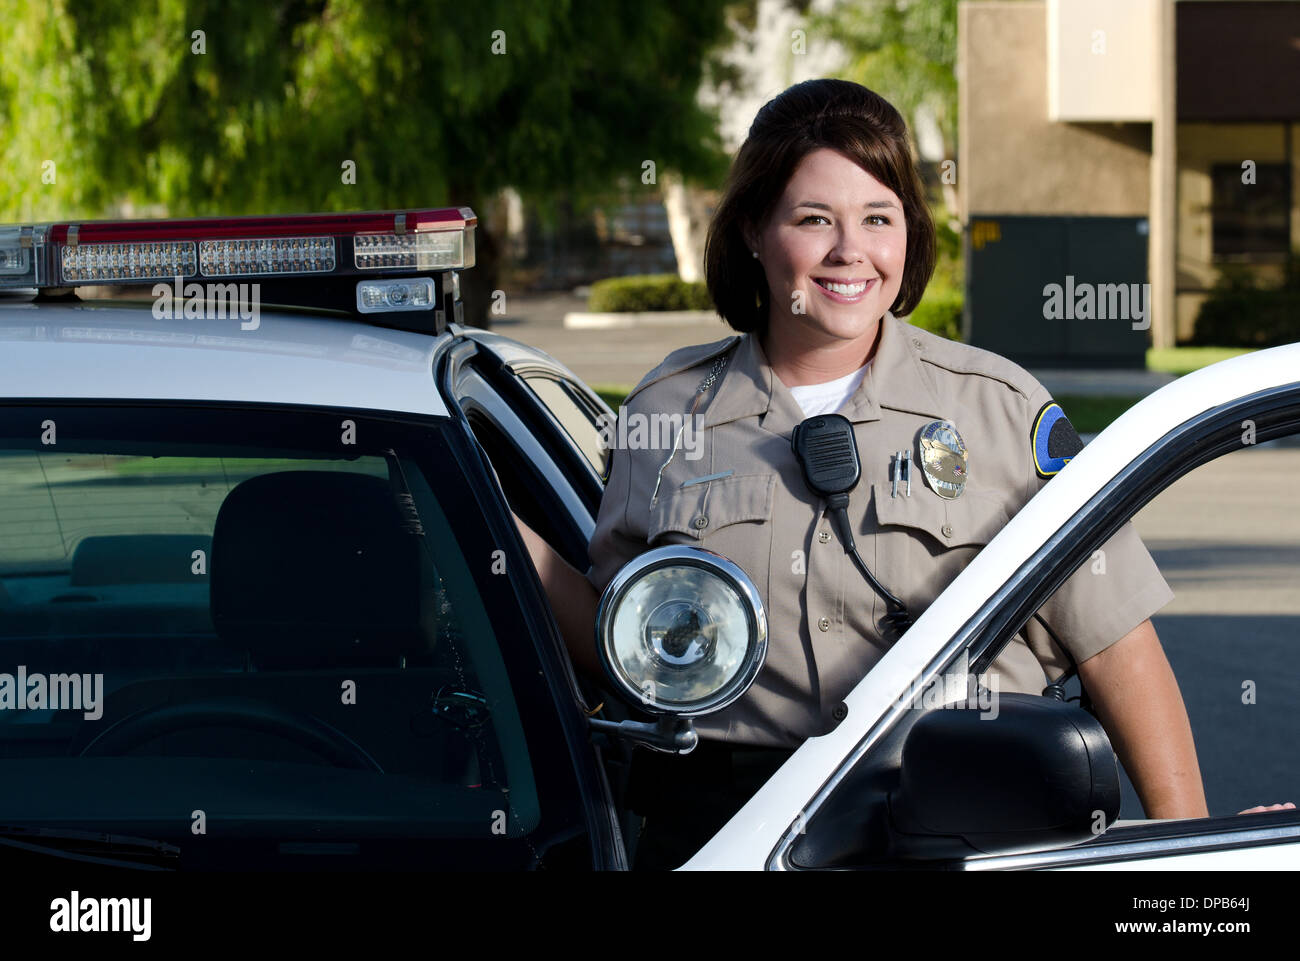 a friendly looking police officer smiles and stands next to her patrol car. Stock Photo